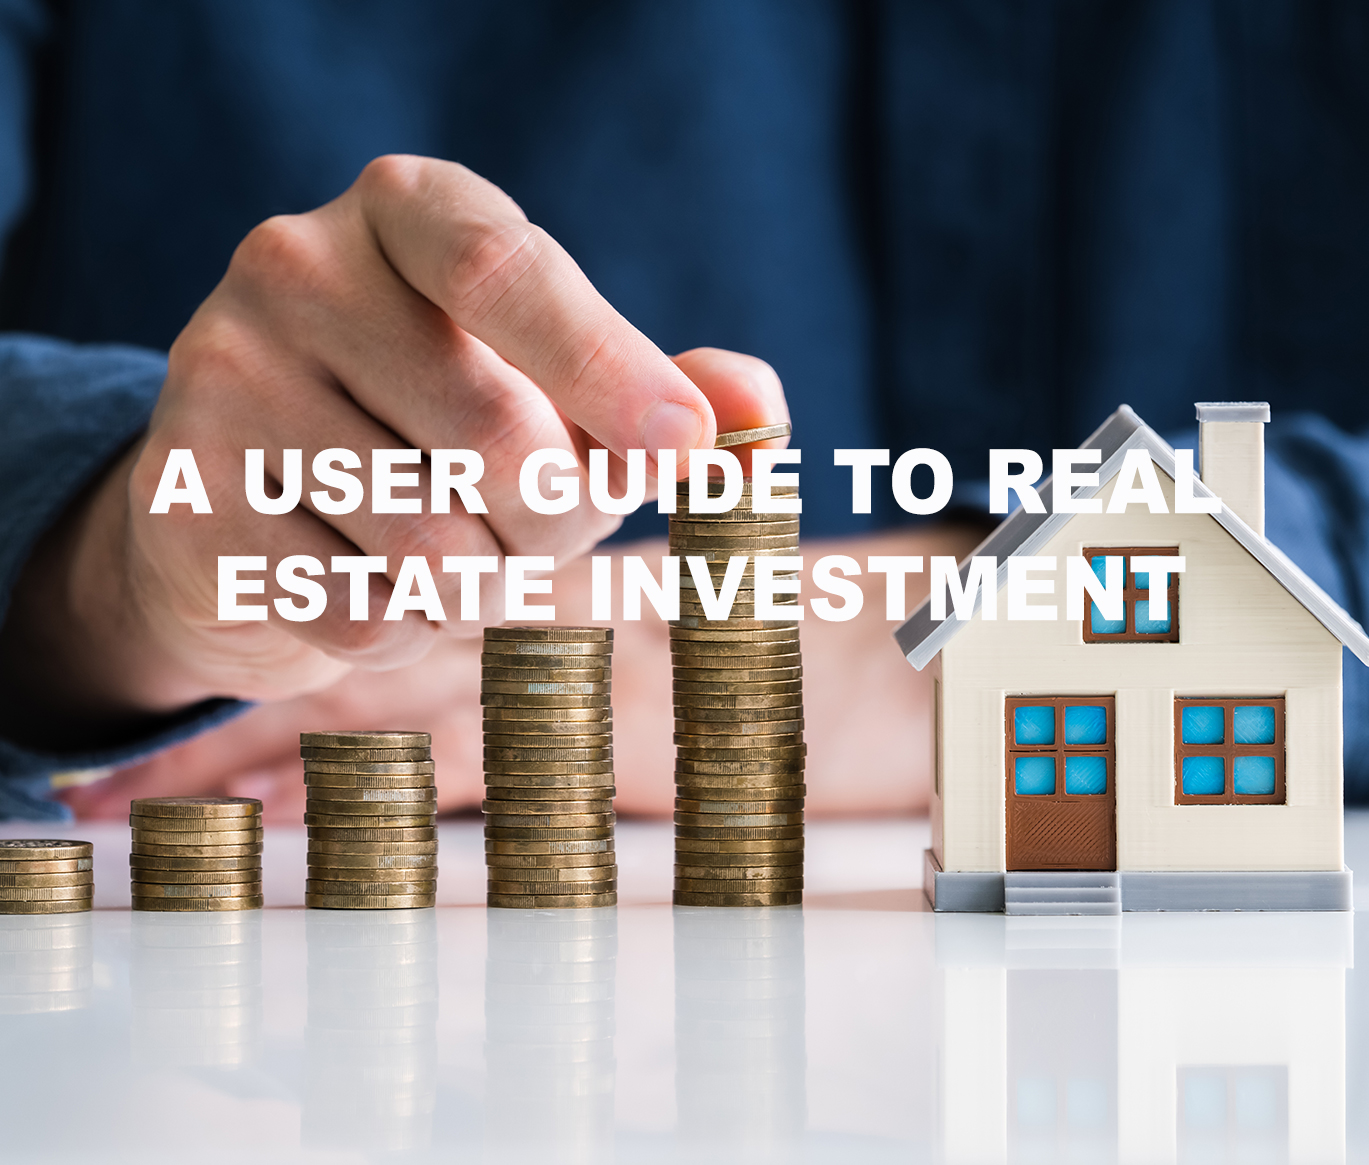 A user guide to real estate investment